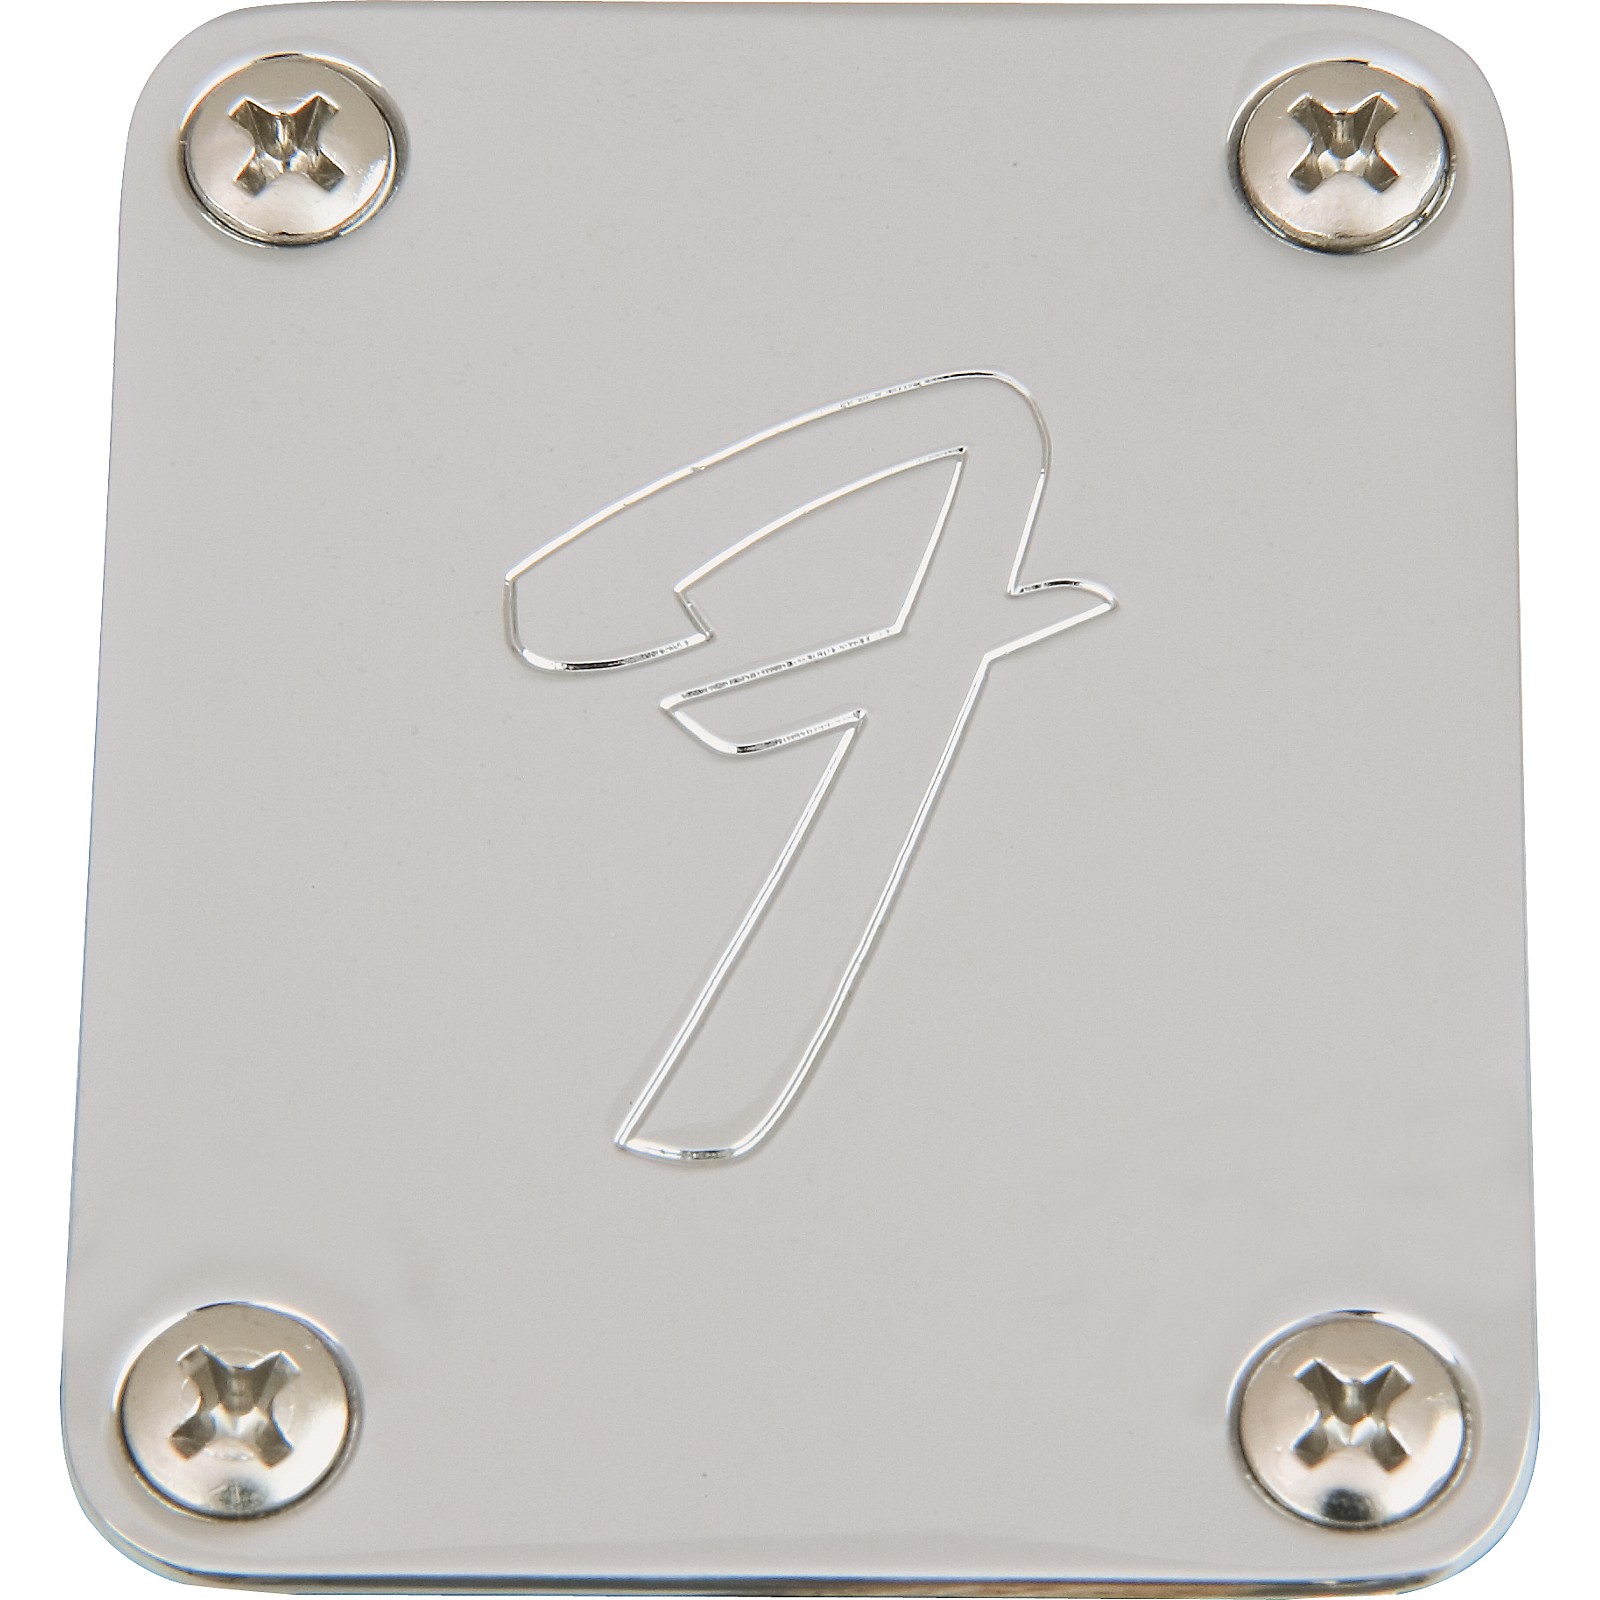 Guinness The layout Plasticity Fender '70s 'F' Style Neck Plate Chrome | Guitar Center